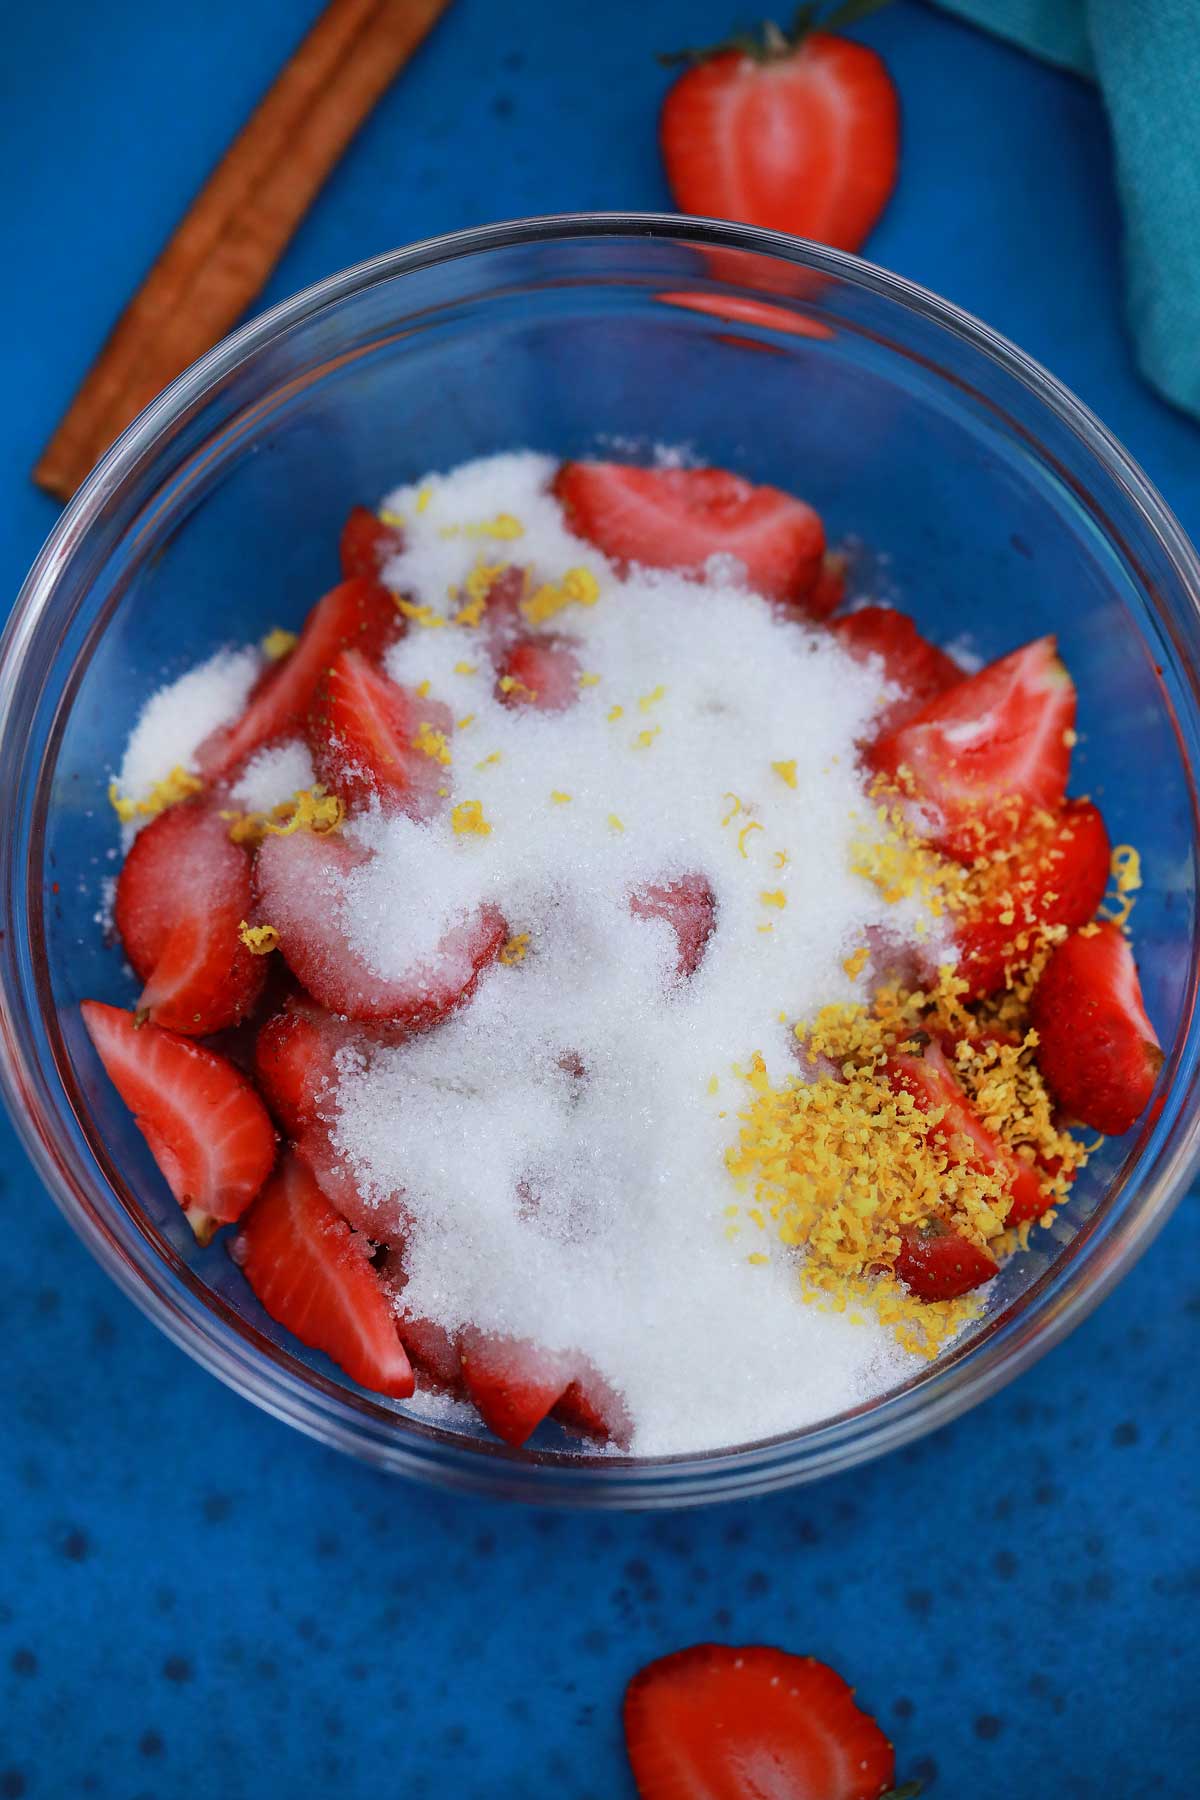 Strawberry ingredients in bowl